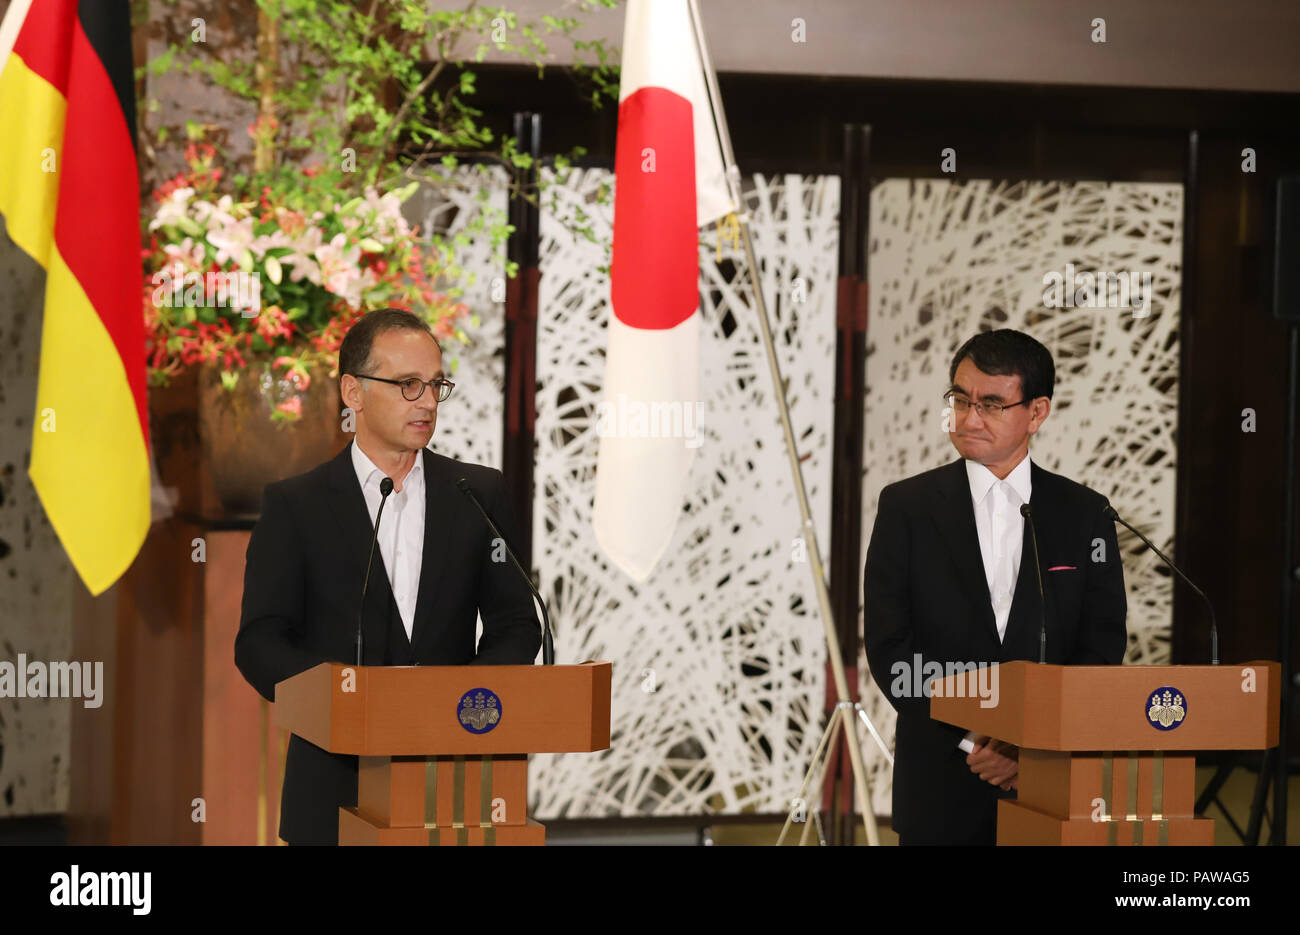 Tokyo, Japan. 25th July, 2018. Visiting German Foreign Minister Heiko Maas (L) and his Japanese counterpart Taro Kono give their statements after their meeting at the Iikura guesthouse in Tokyo on Wednesday, July 25, 2018. Maas is now in Tokyo on the first leg of his Asian tour. Credit: Yoshio Tsunoda/AFLO/Alamy Live News Stock Photo